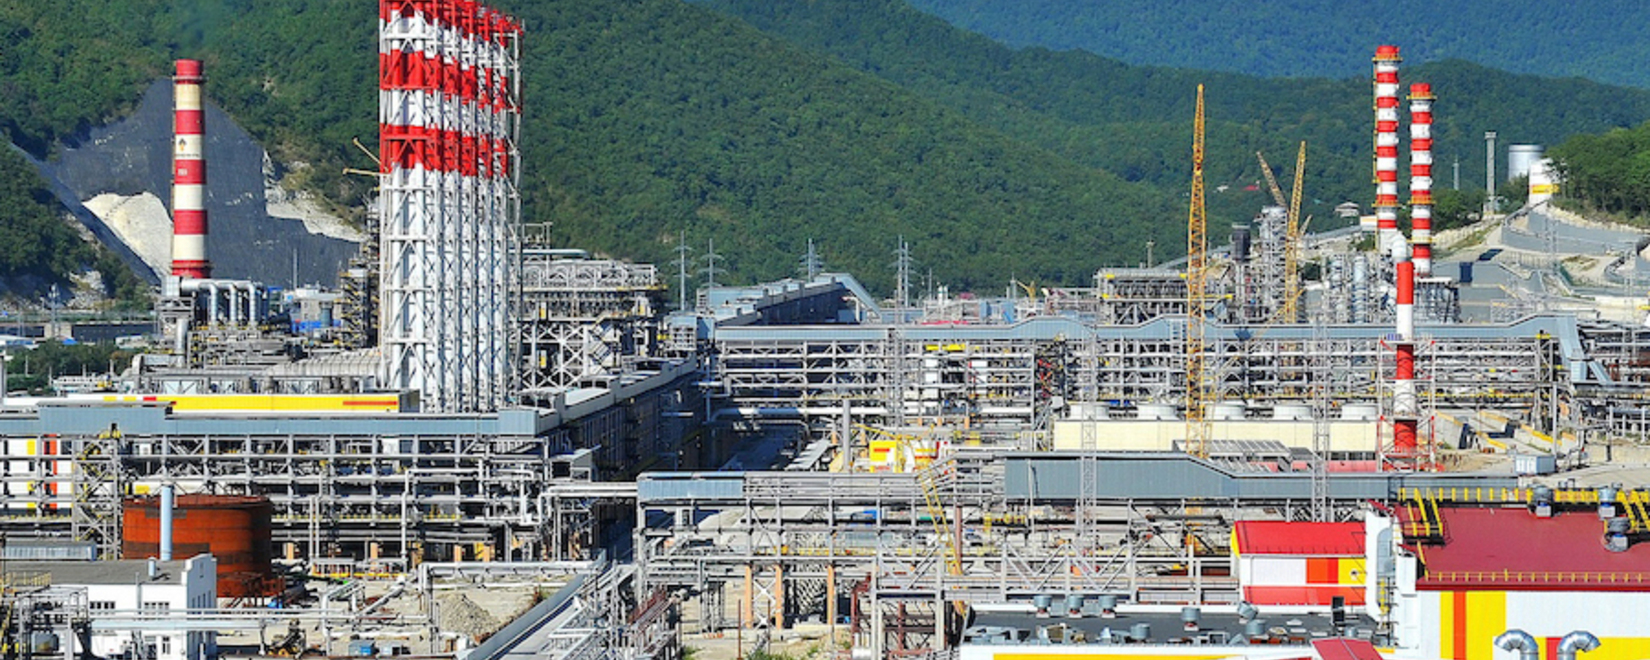 The Ministry of Energy of Russia assures that there are no fuel supply problems due to the accident at the Tuapse plant, and the reserves are sufficient.